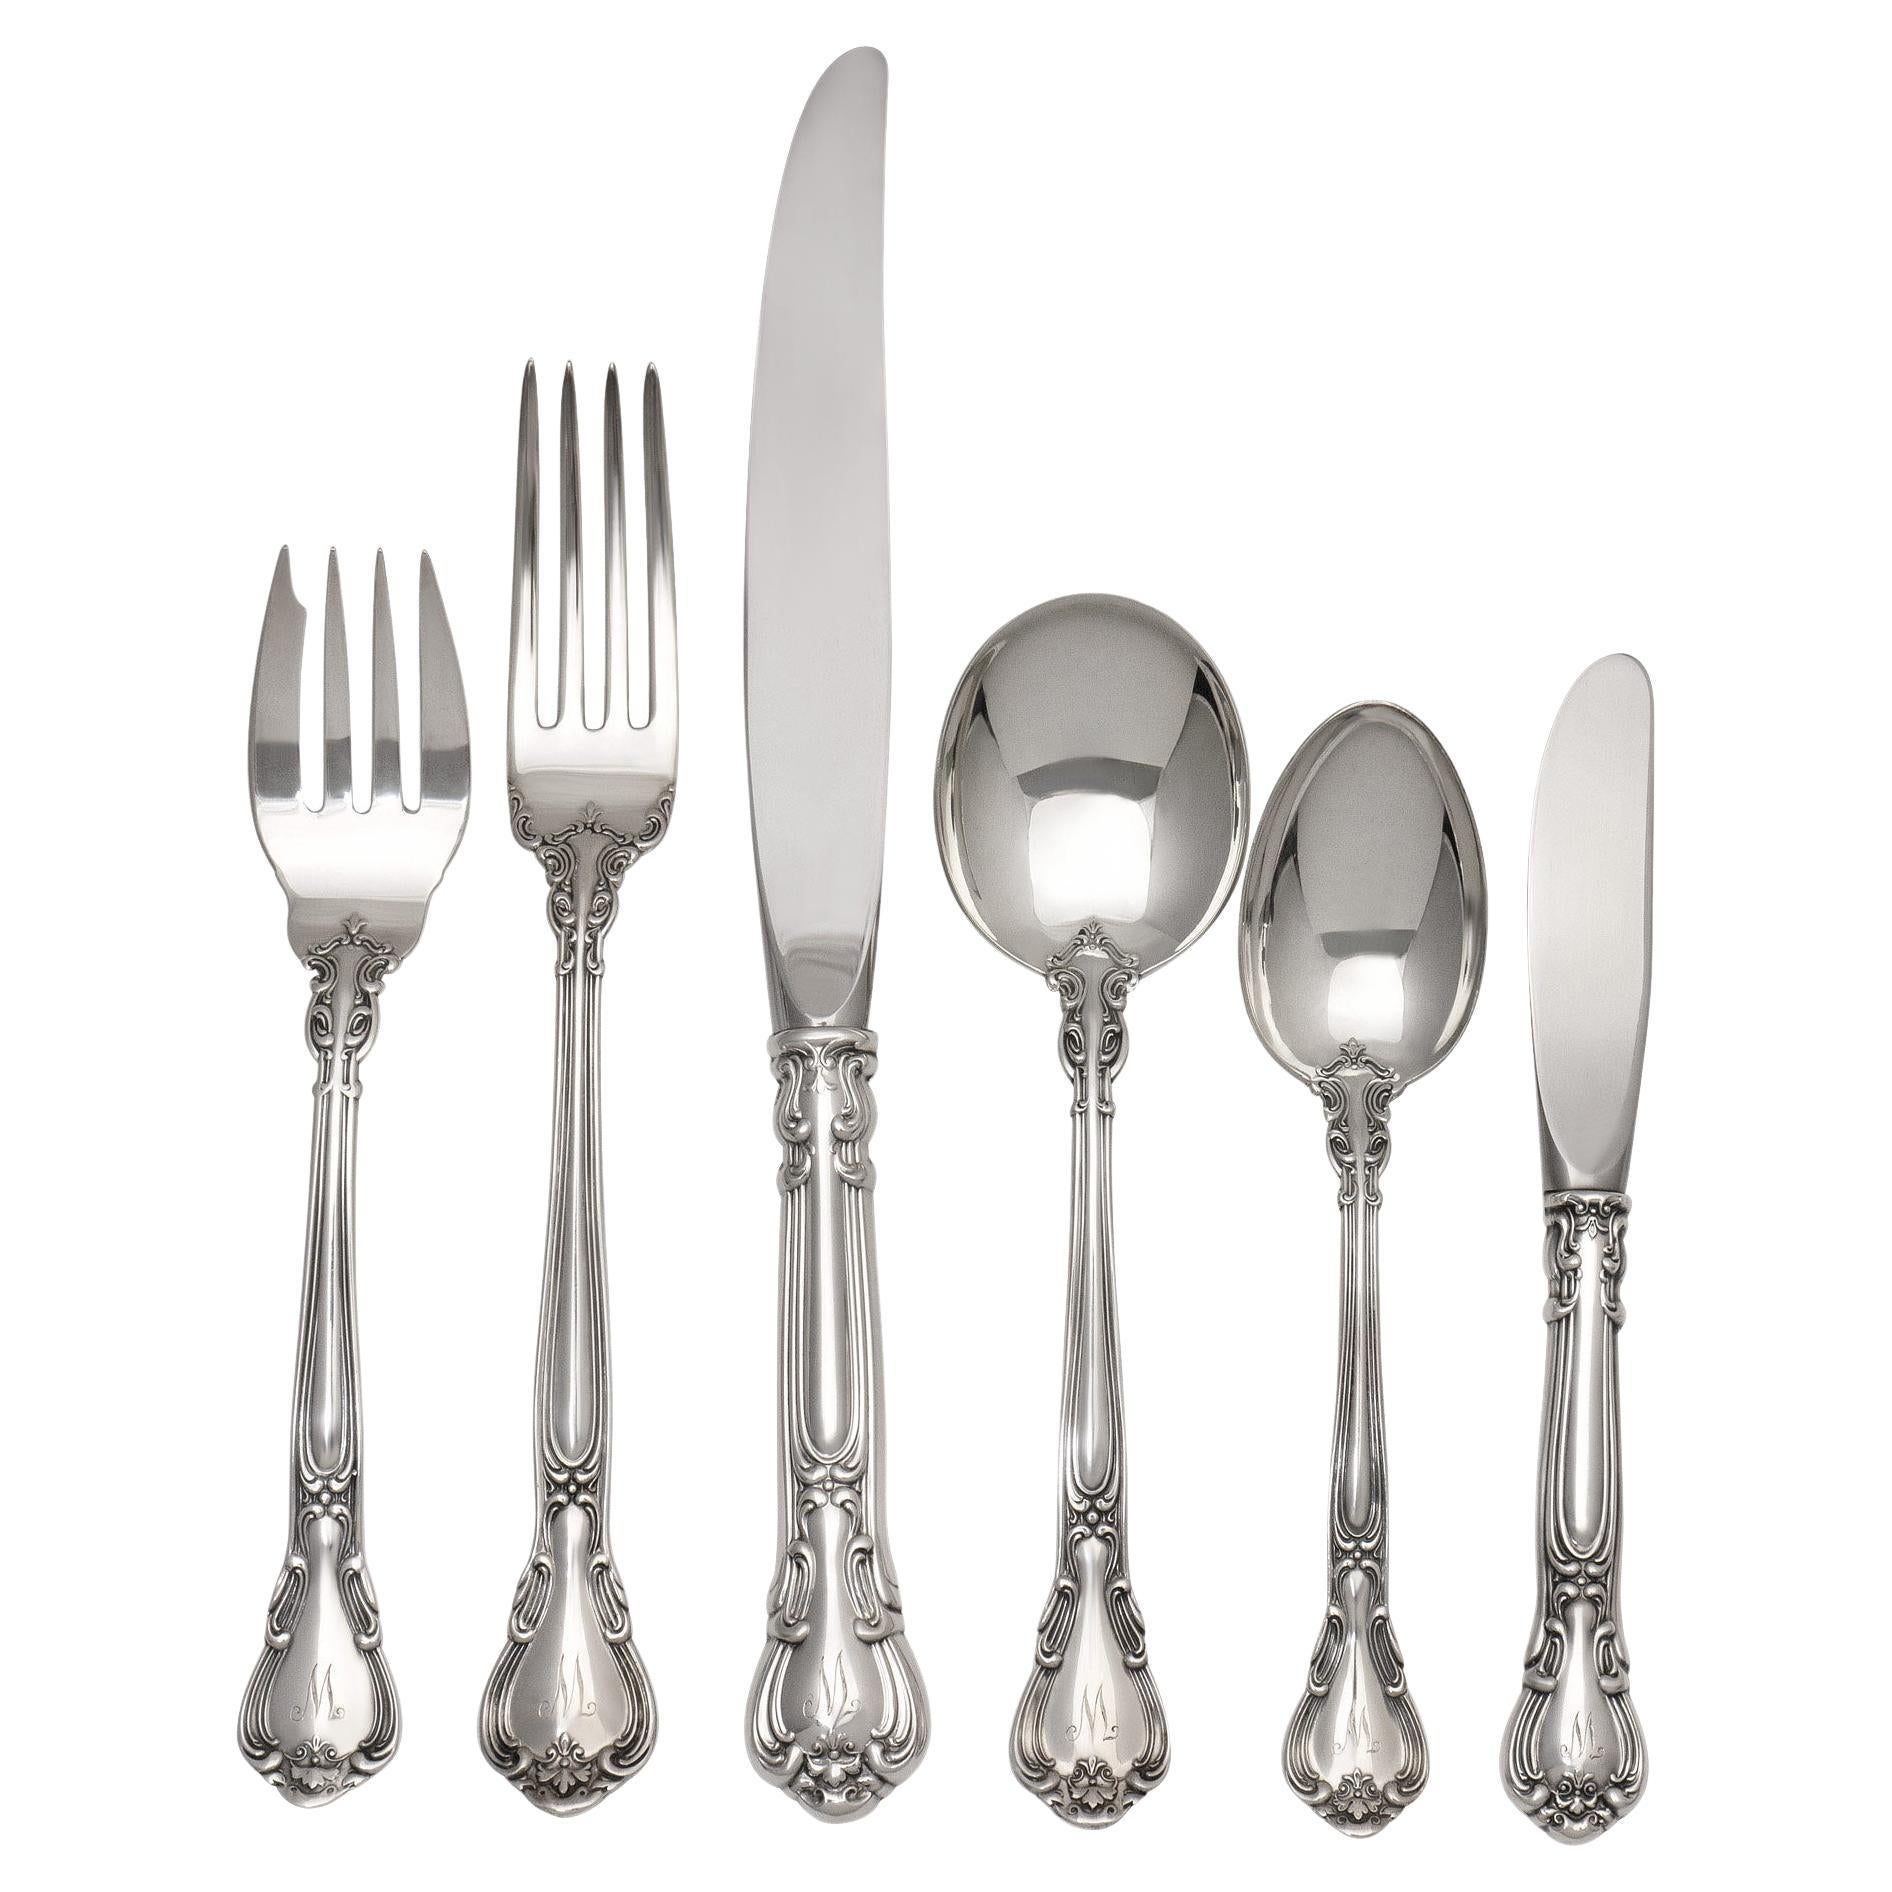 "Chantilly" Sterling Silver Flatware Set Patented in 1895 by Gorham